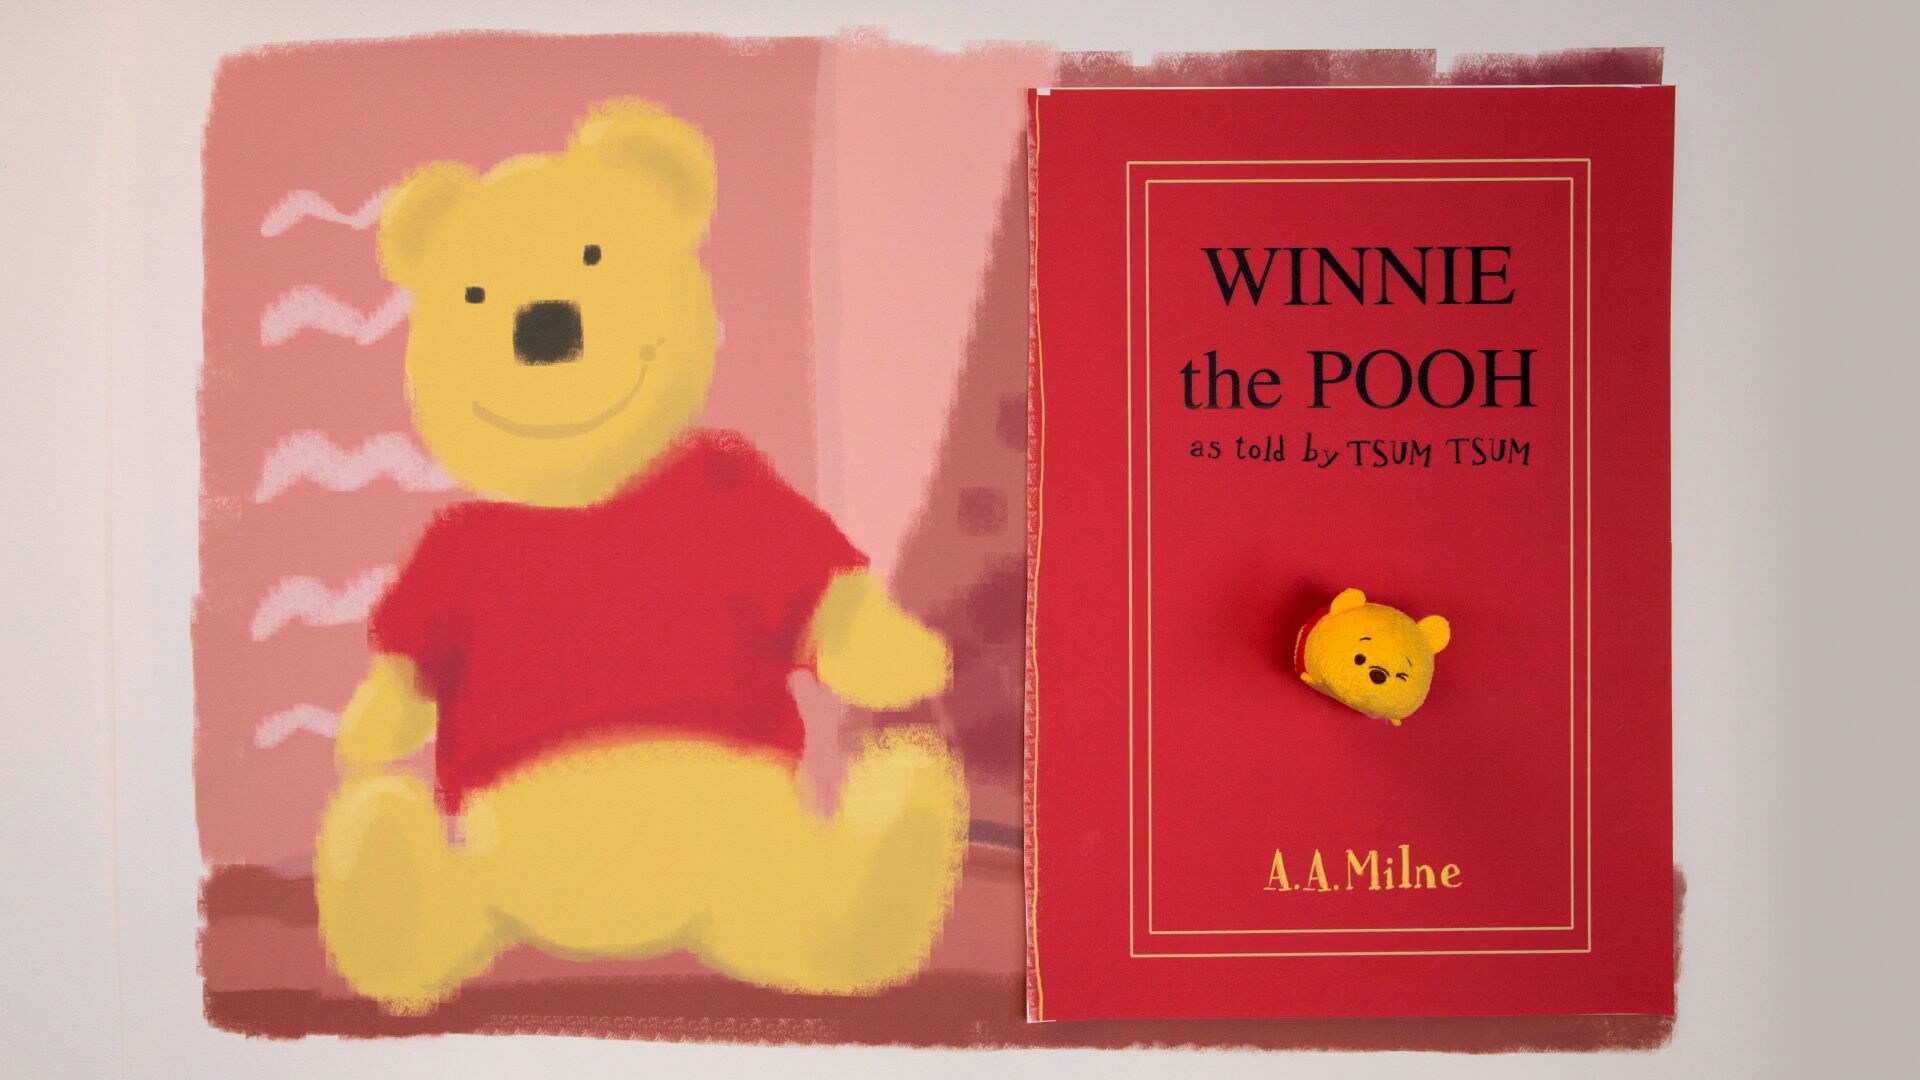 Winnie the Pooh 2011 - As Told By Tsum Tsum